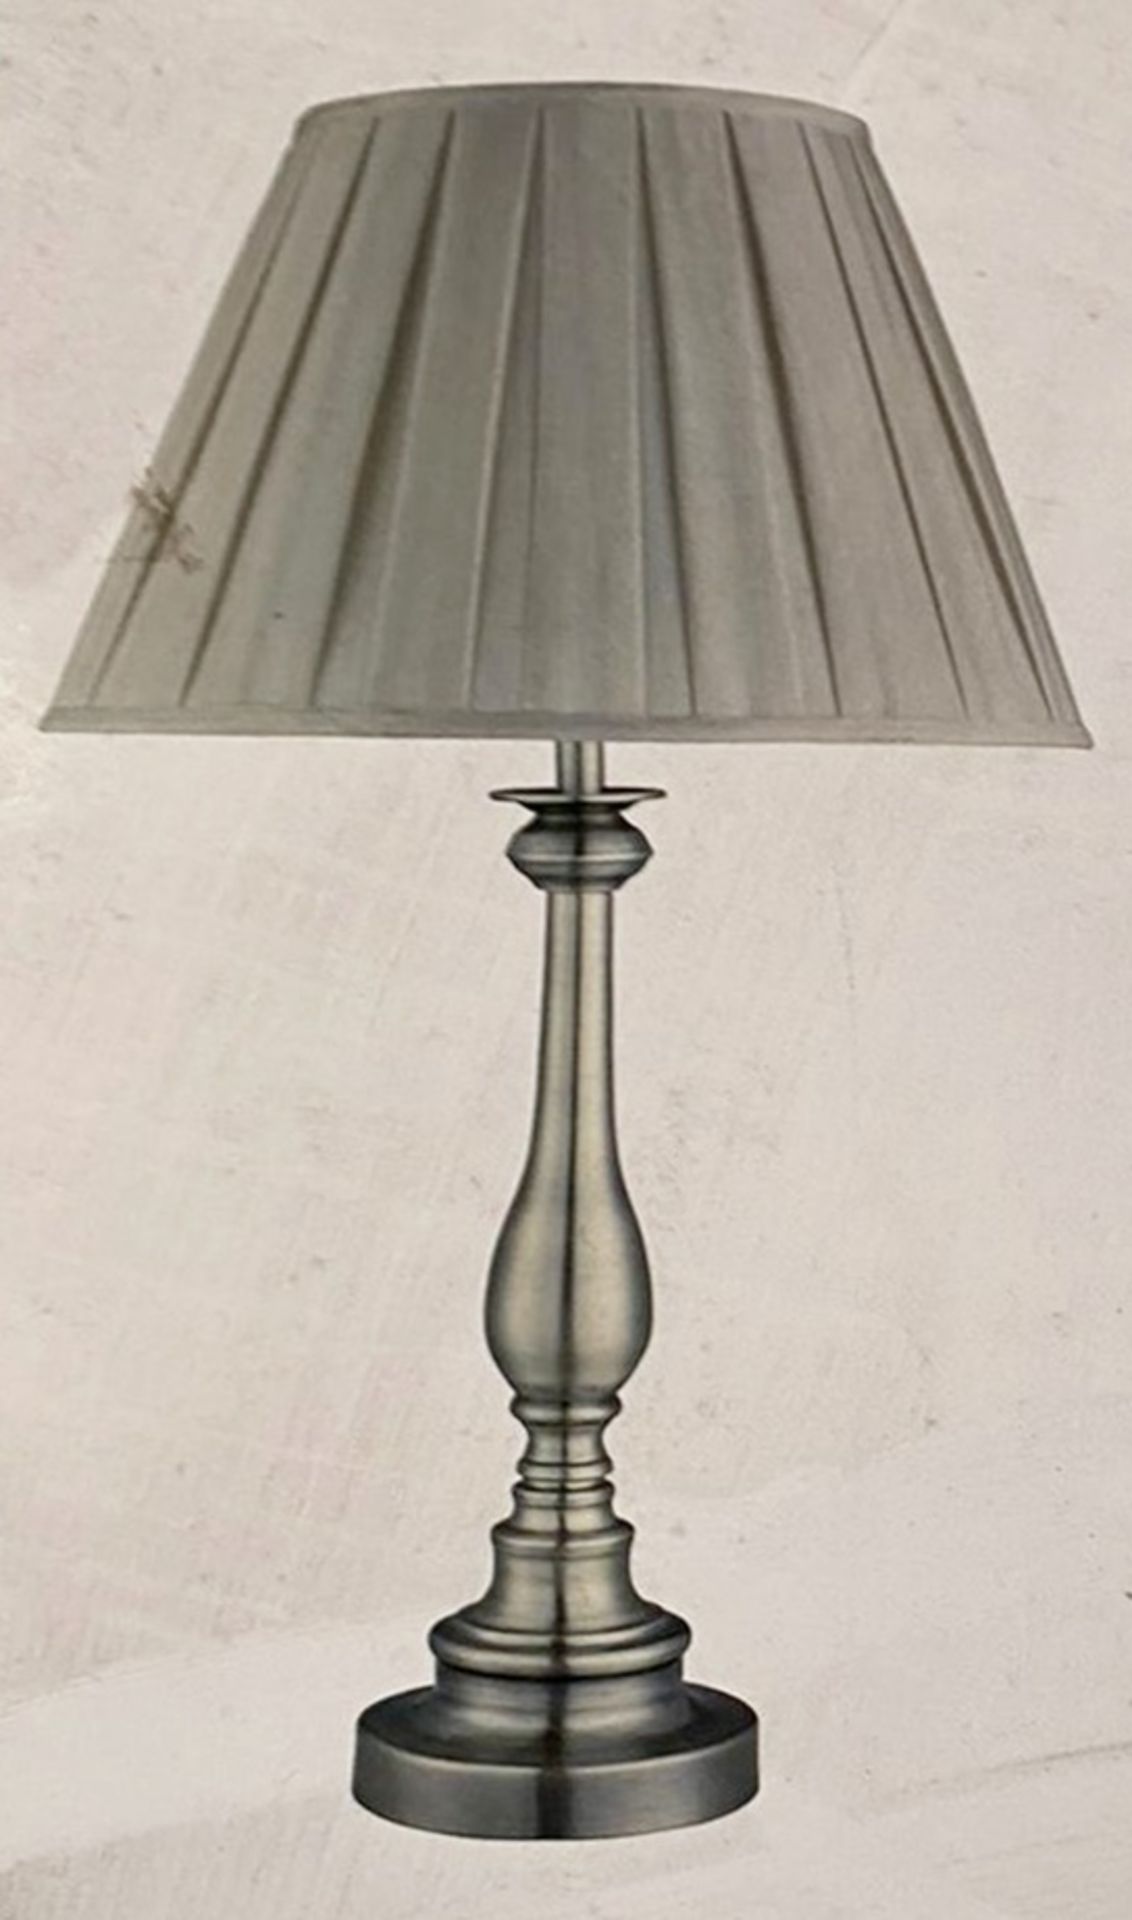 1 x Searchlight Spindle Table Lamp in Antique Brass - Ref: 6021AB - New and Boxed - RRP: £100.00